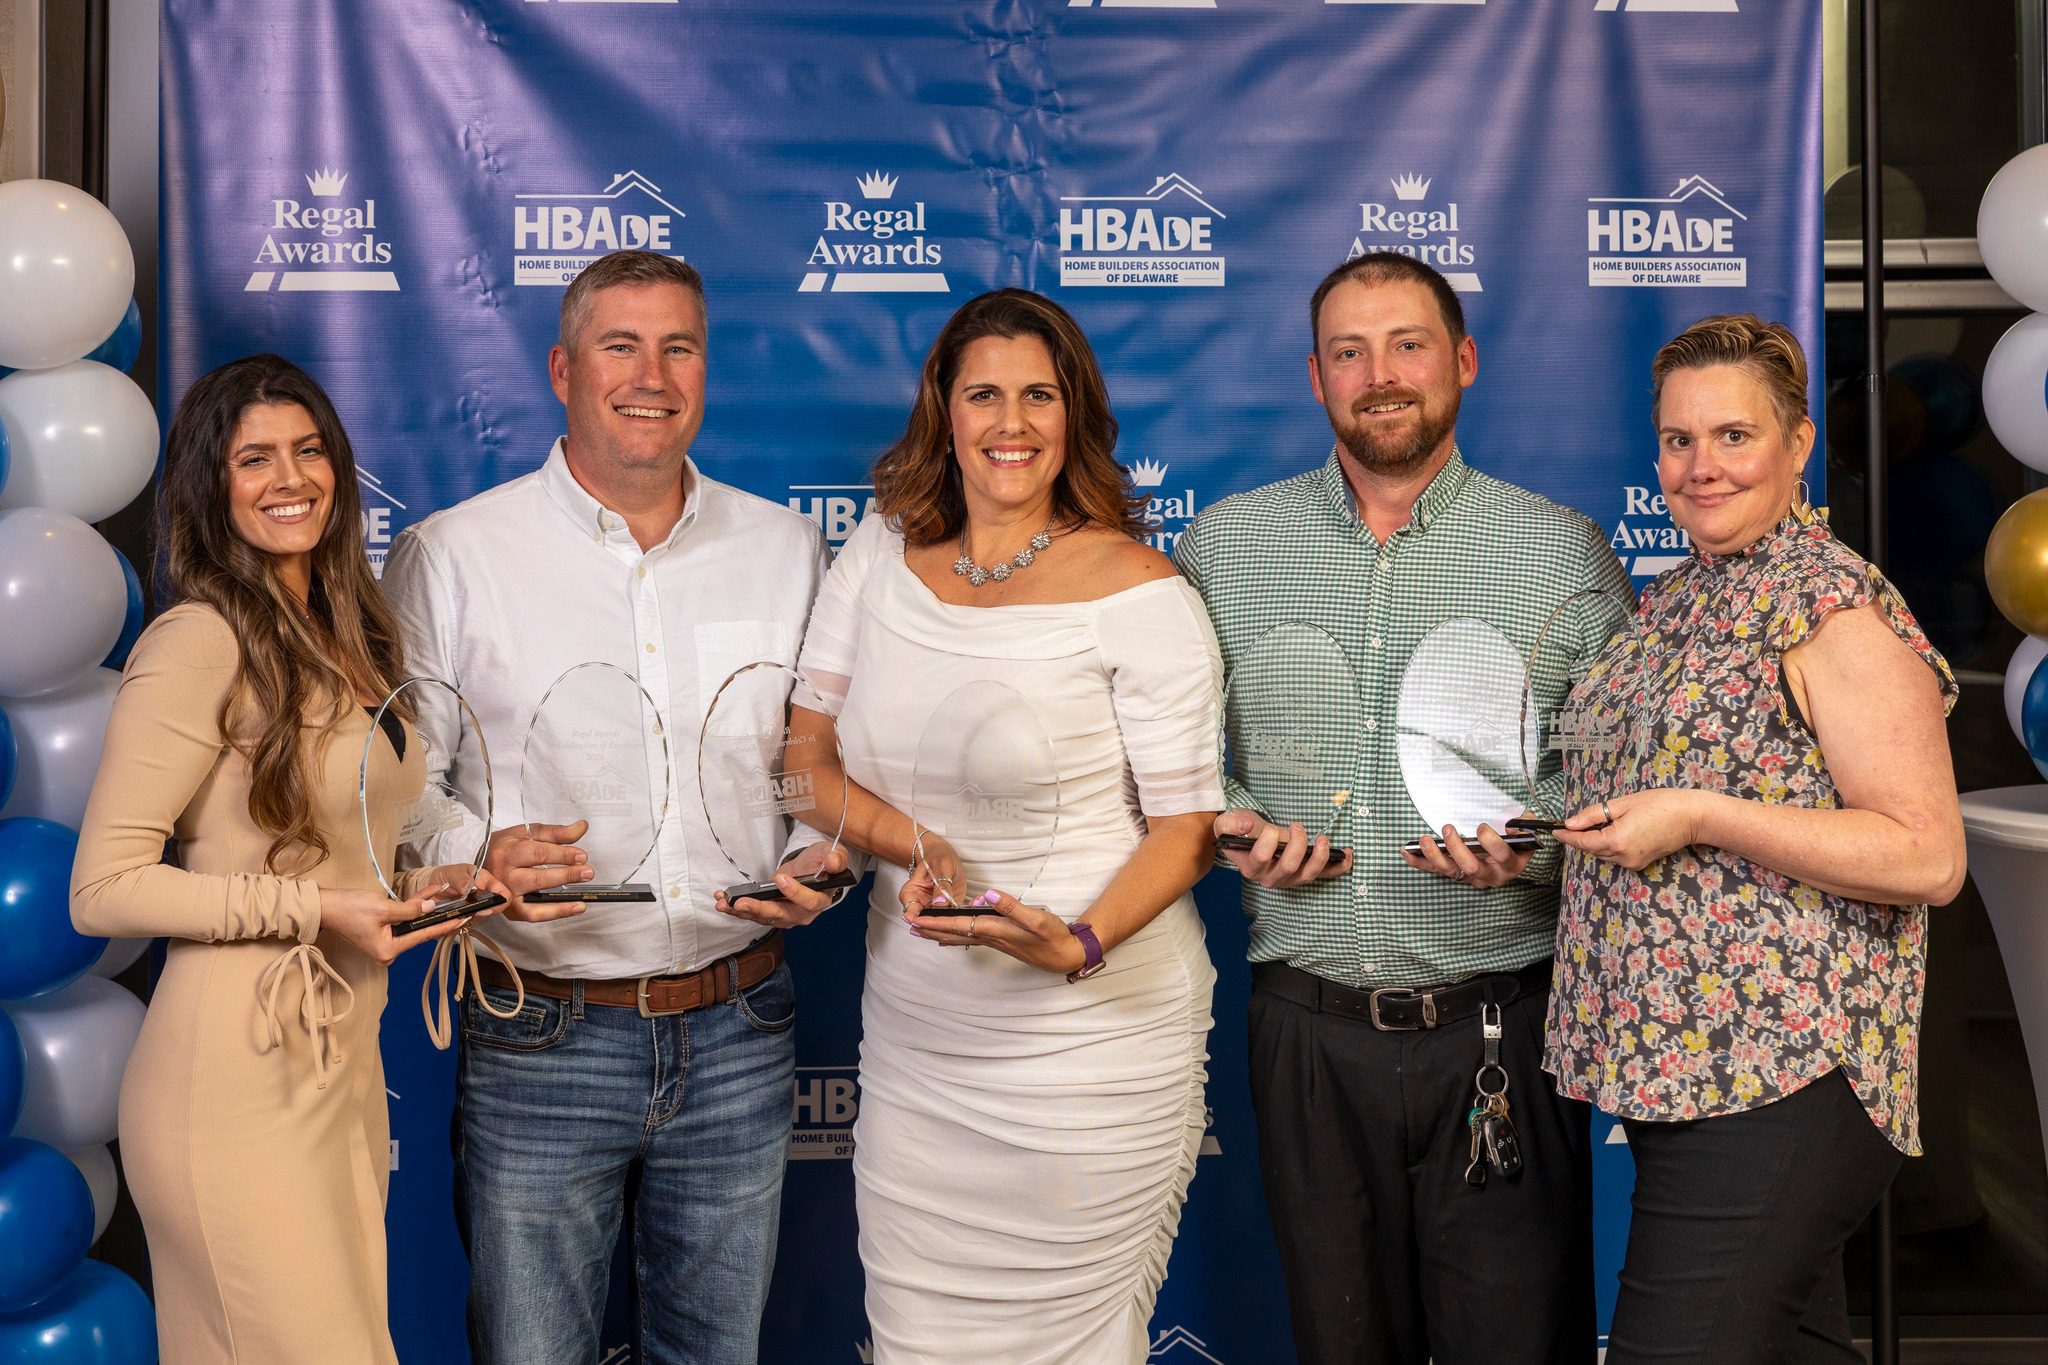 Photo shows the Team at Seely Homes who earned 7 Regal Awards from Delaware Association of Home Builders. Pictured L to R: Cassie Davis, Adrian Seely, Julleanna Seely, Nathaniel Maynard, and Colleen Watson